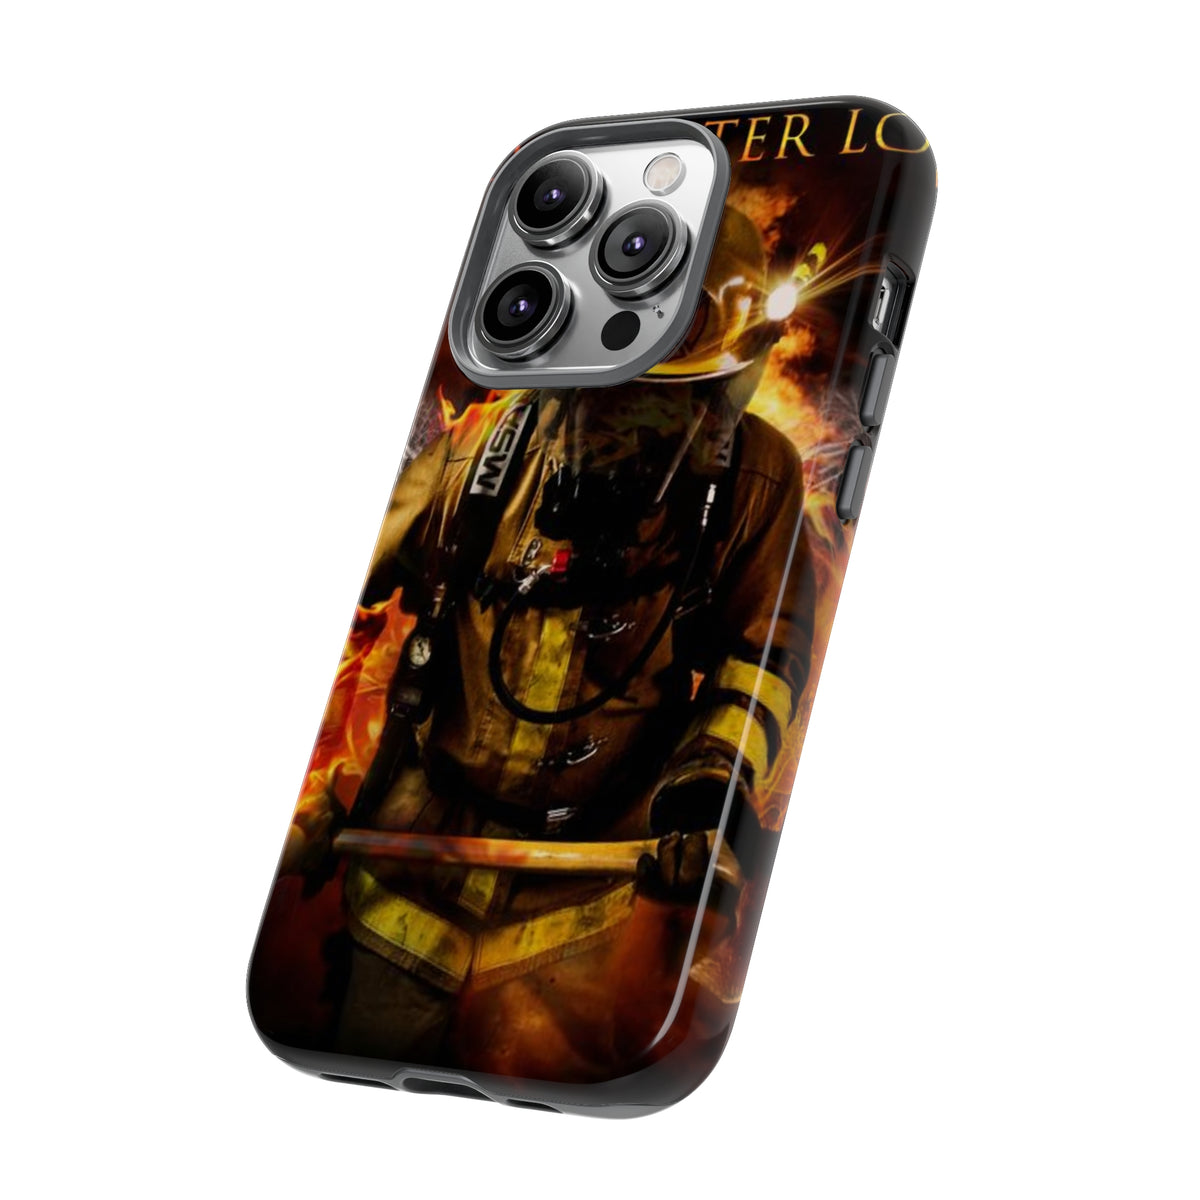 NGL Firefighter Tough Phone Cases